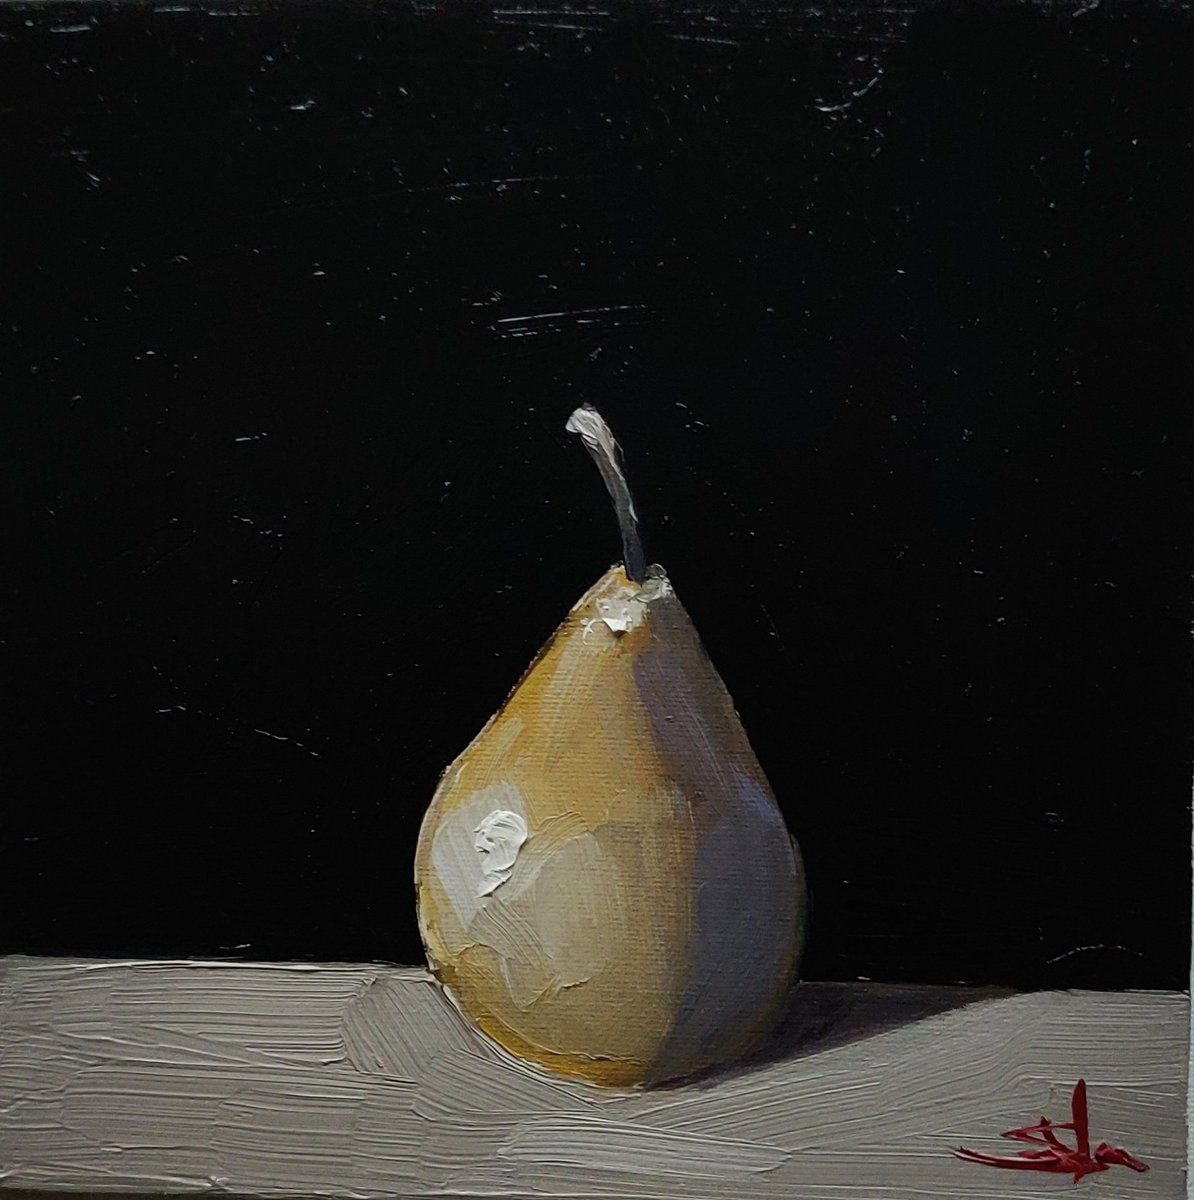 Yellow Pear 8 X 8 Inches Oil on Canvas Board Available at auction #artcollectors #oilpainting #impressionism #interiordesign #homedecor #ArtLovers #impasto #artist #originalart #paintings #artforsale